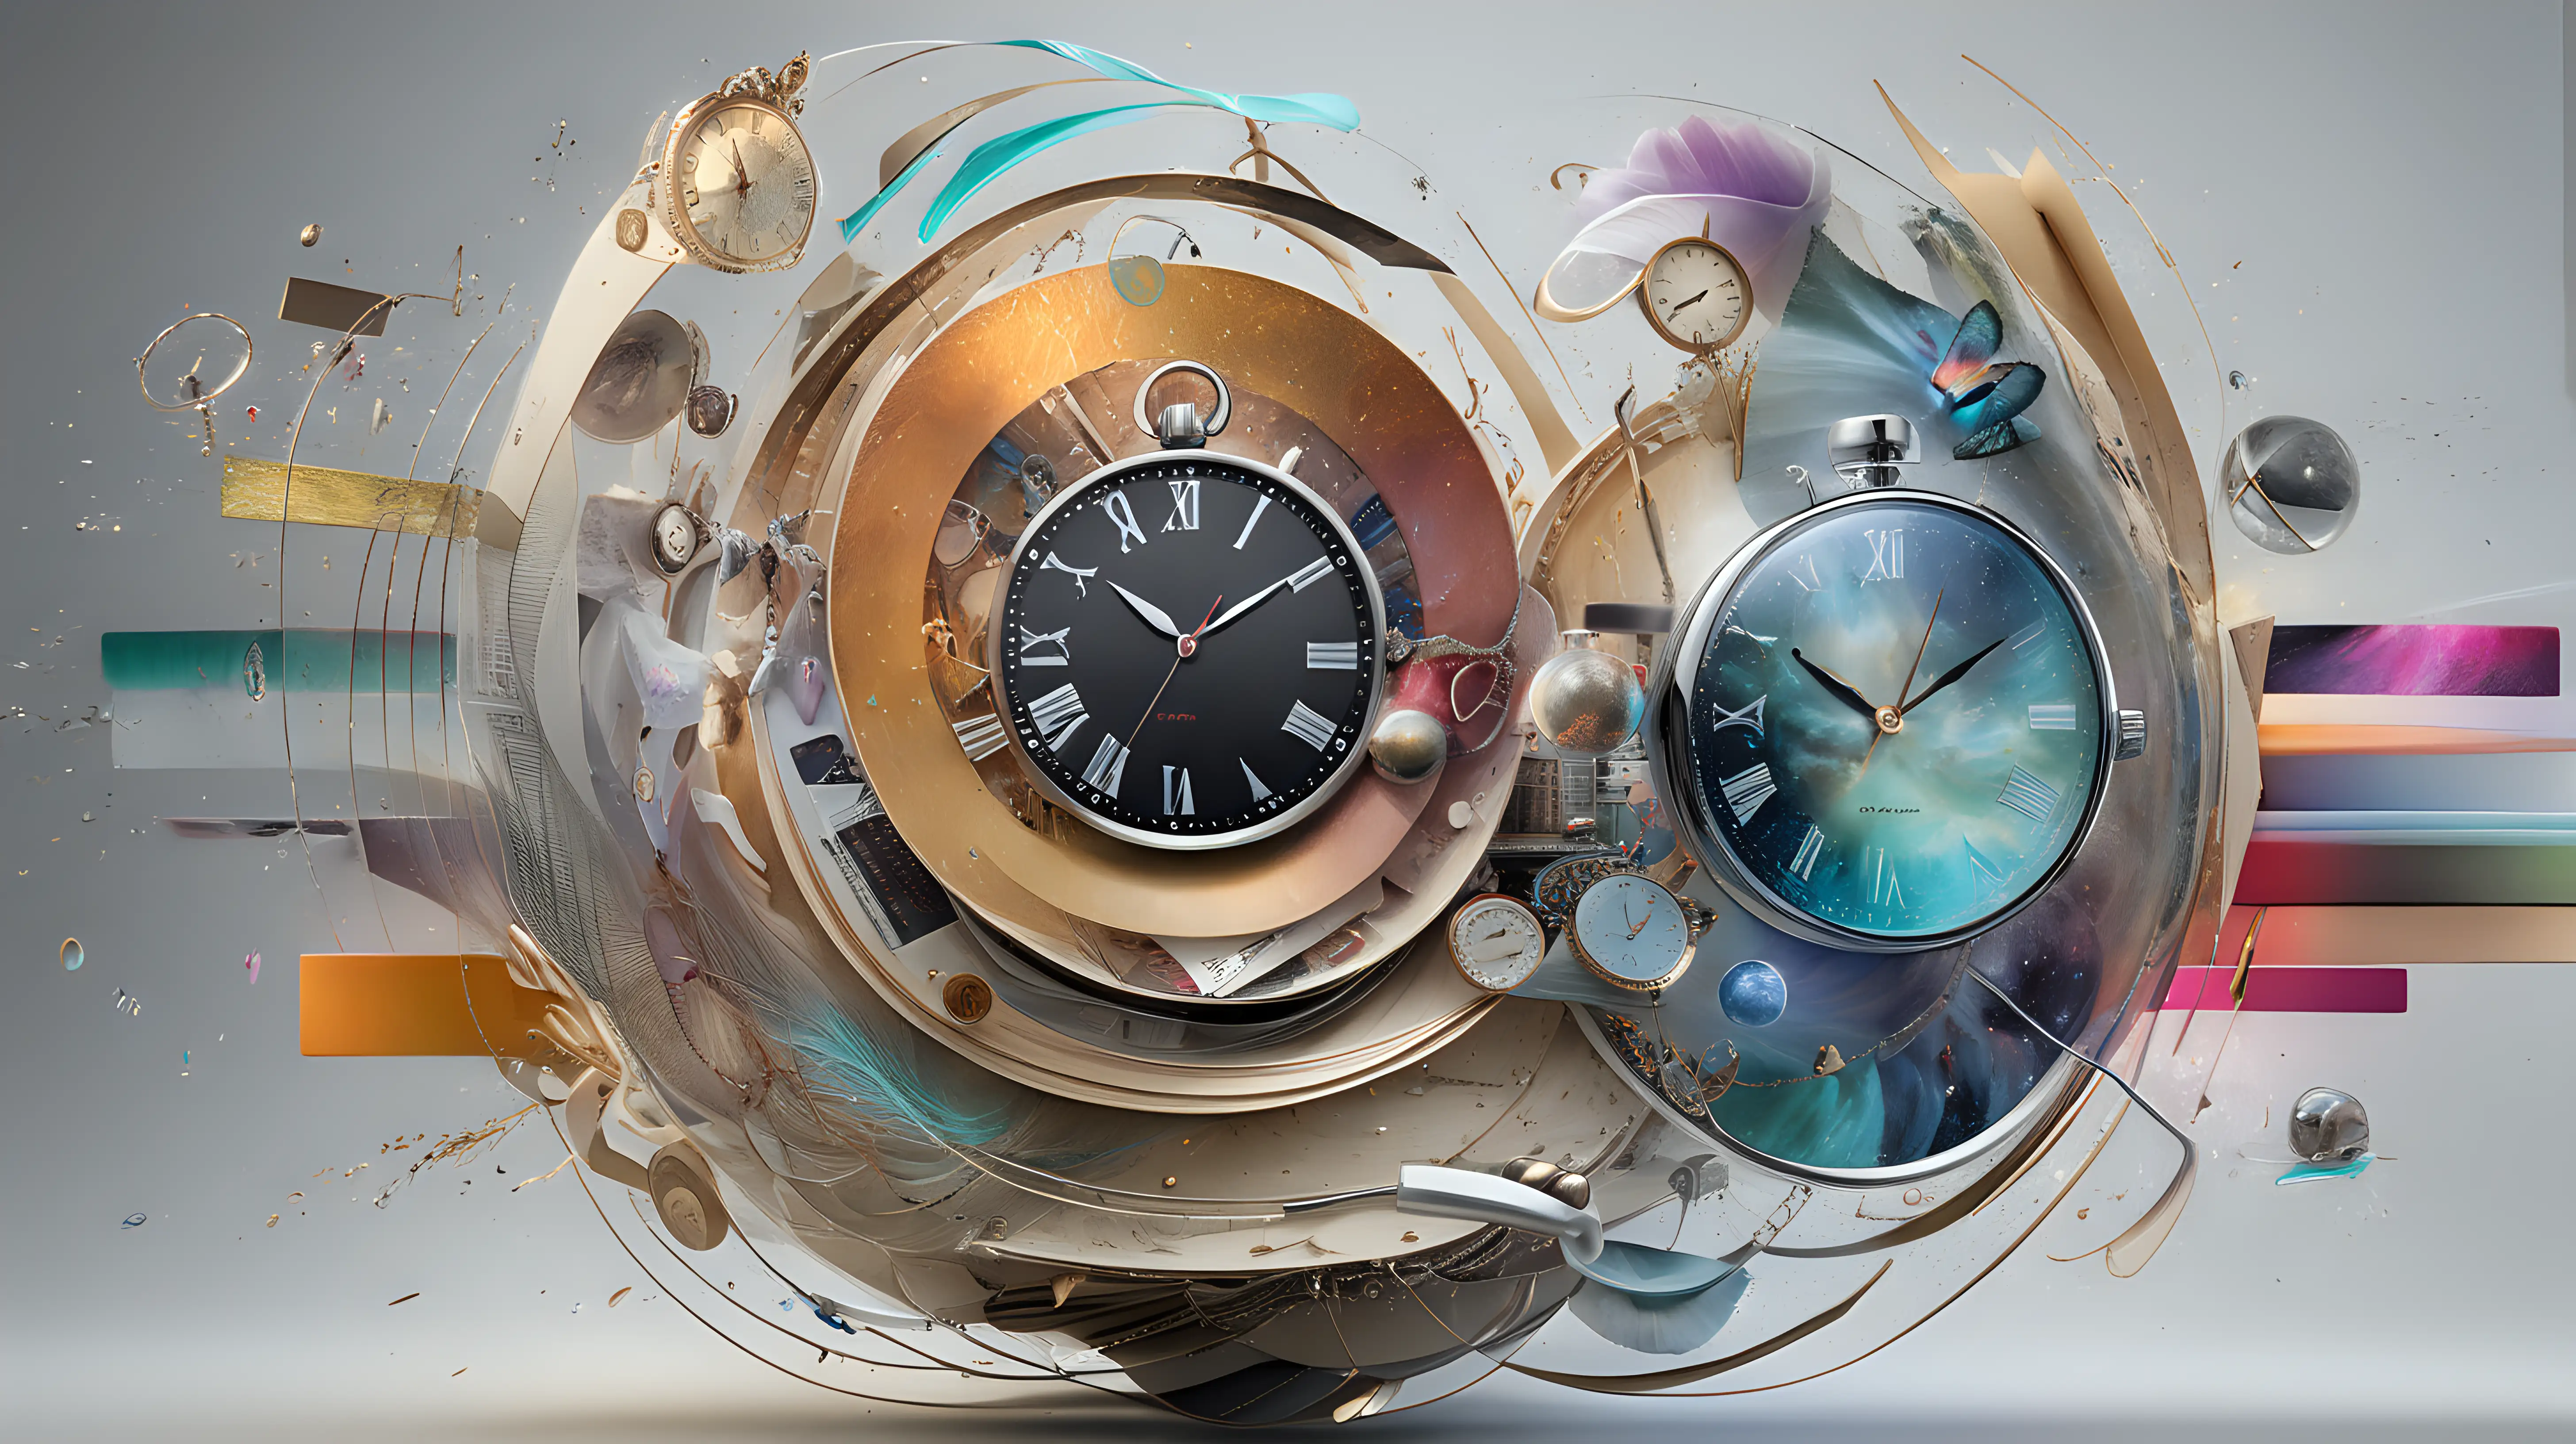 Abstract Time Warps Multimedia Time Capsule Art Piece